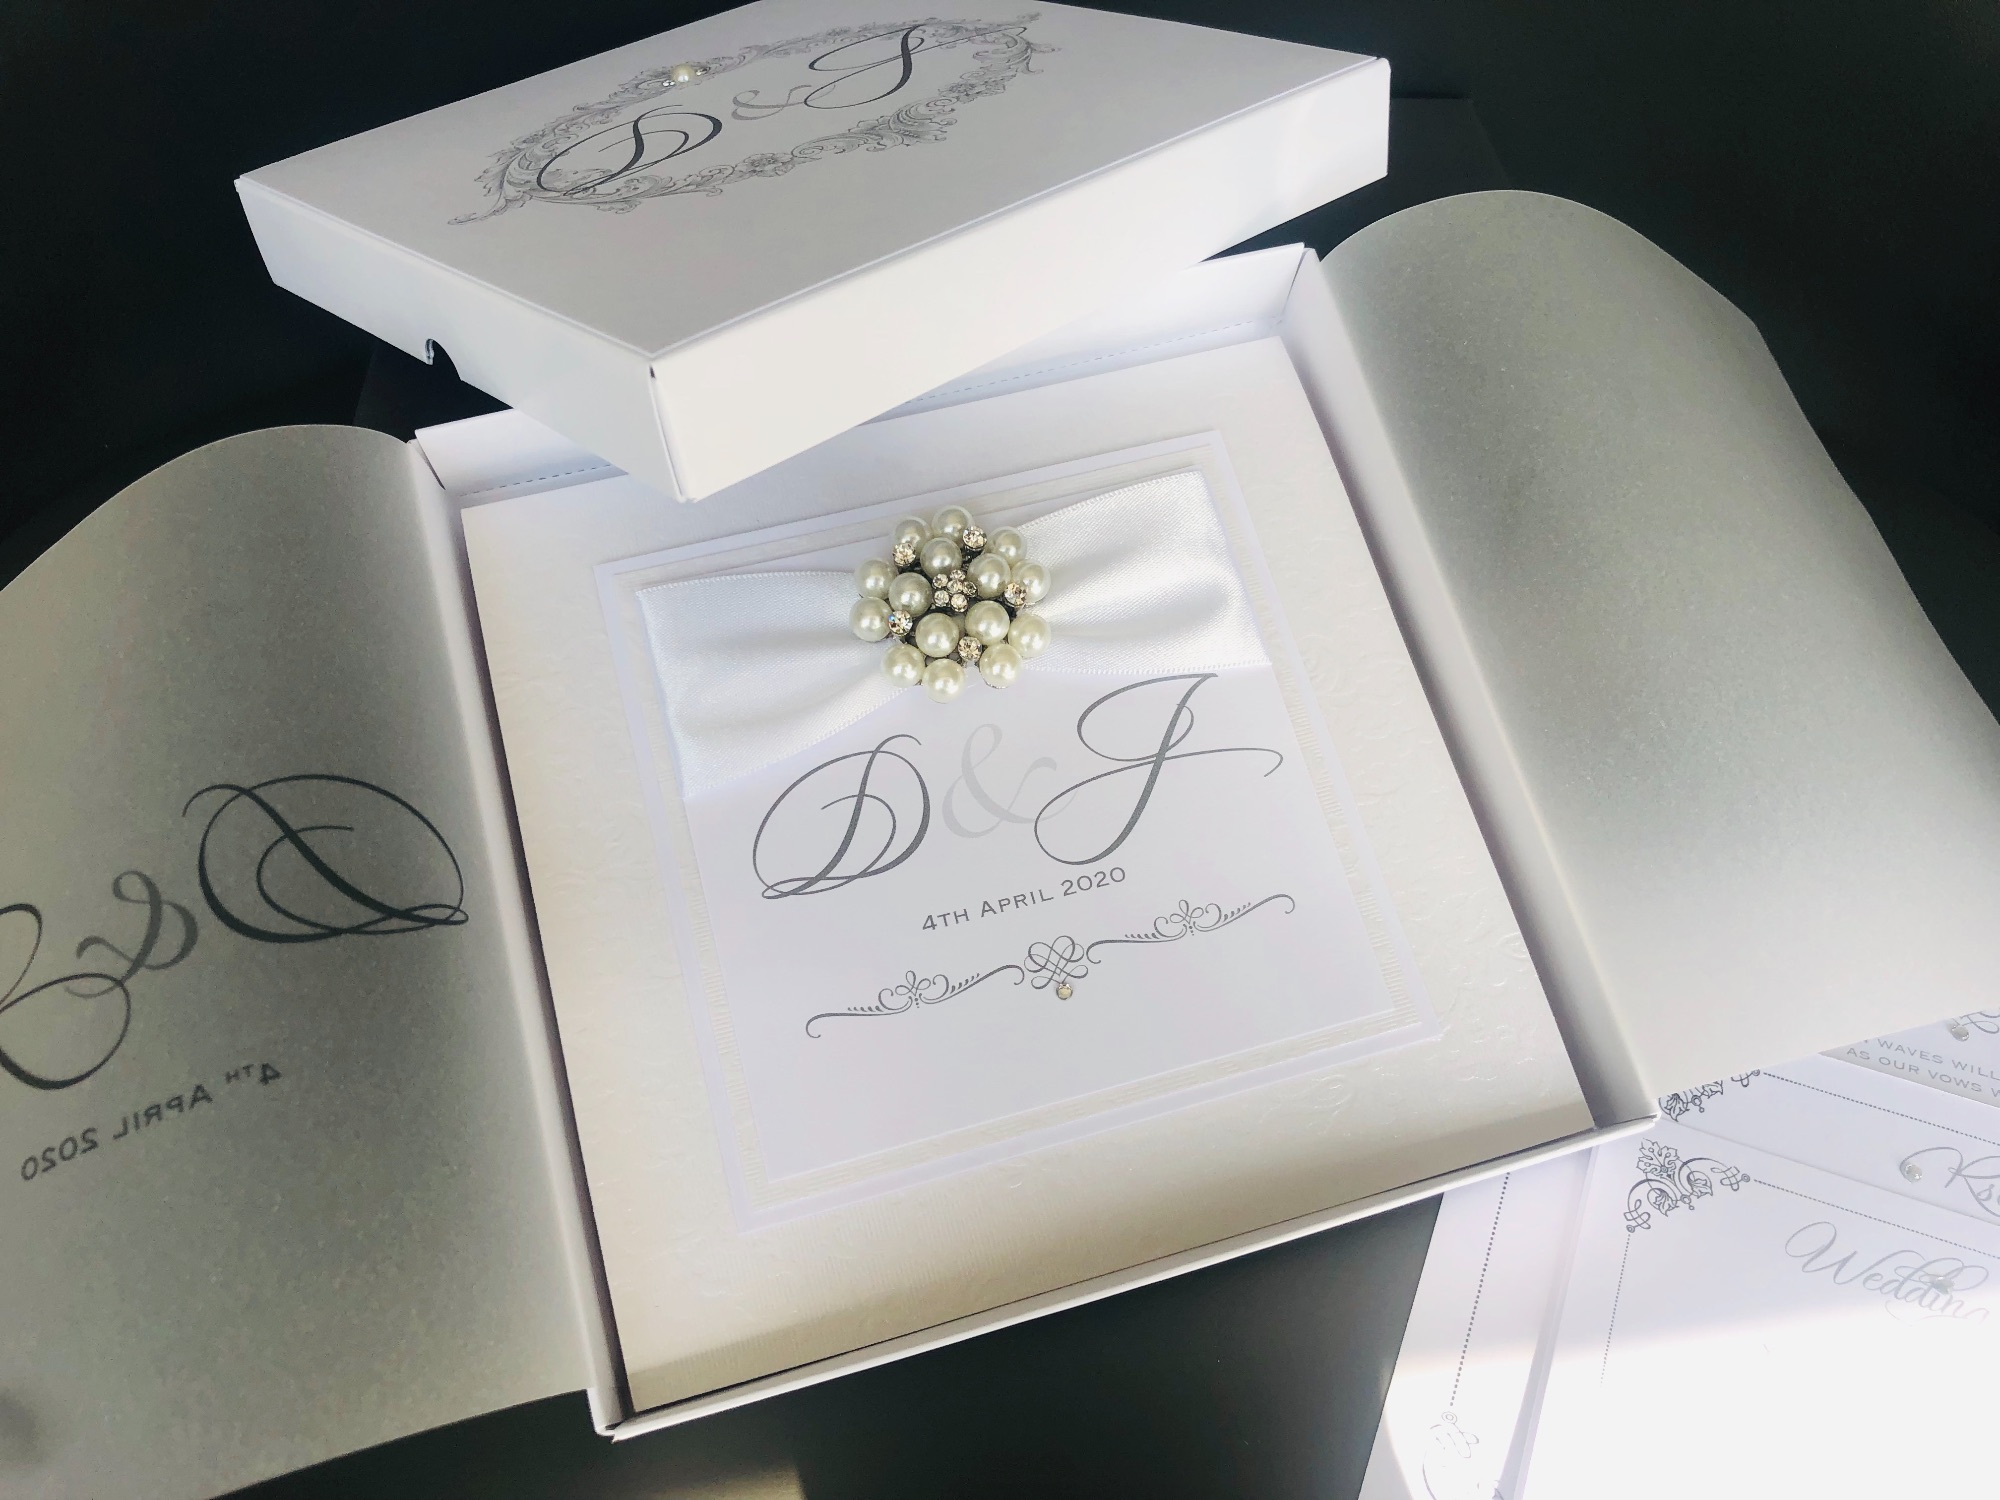 White monogrammed boxed wedding invitations with pearl brooch